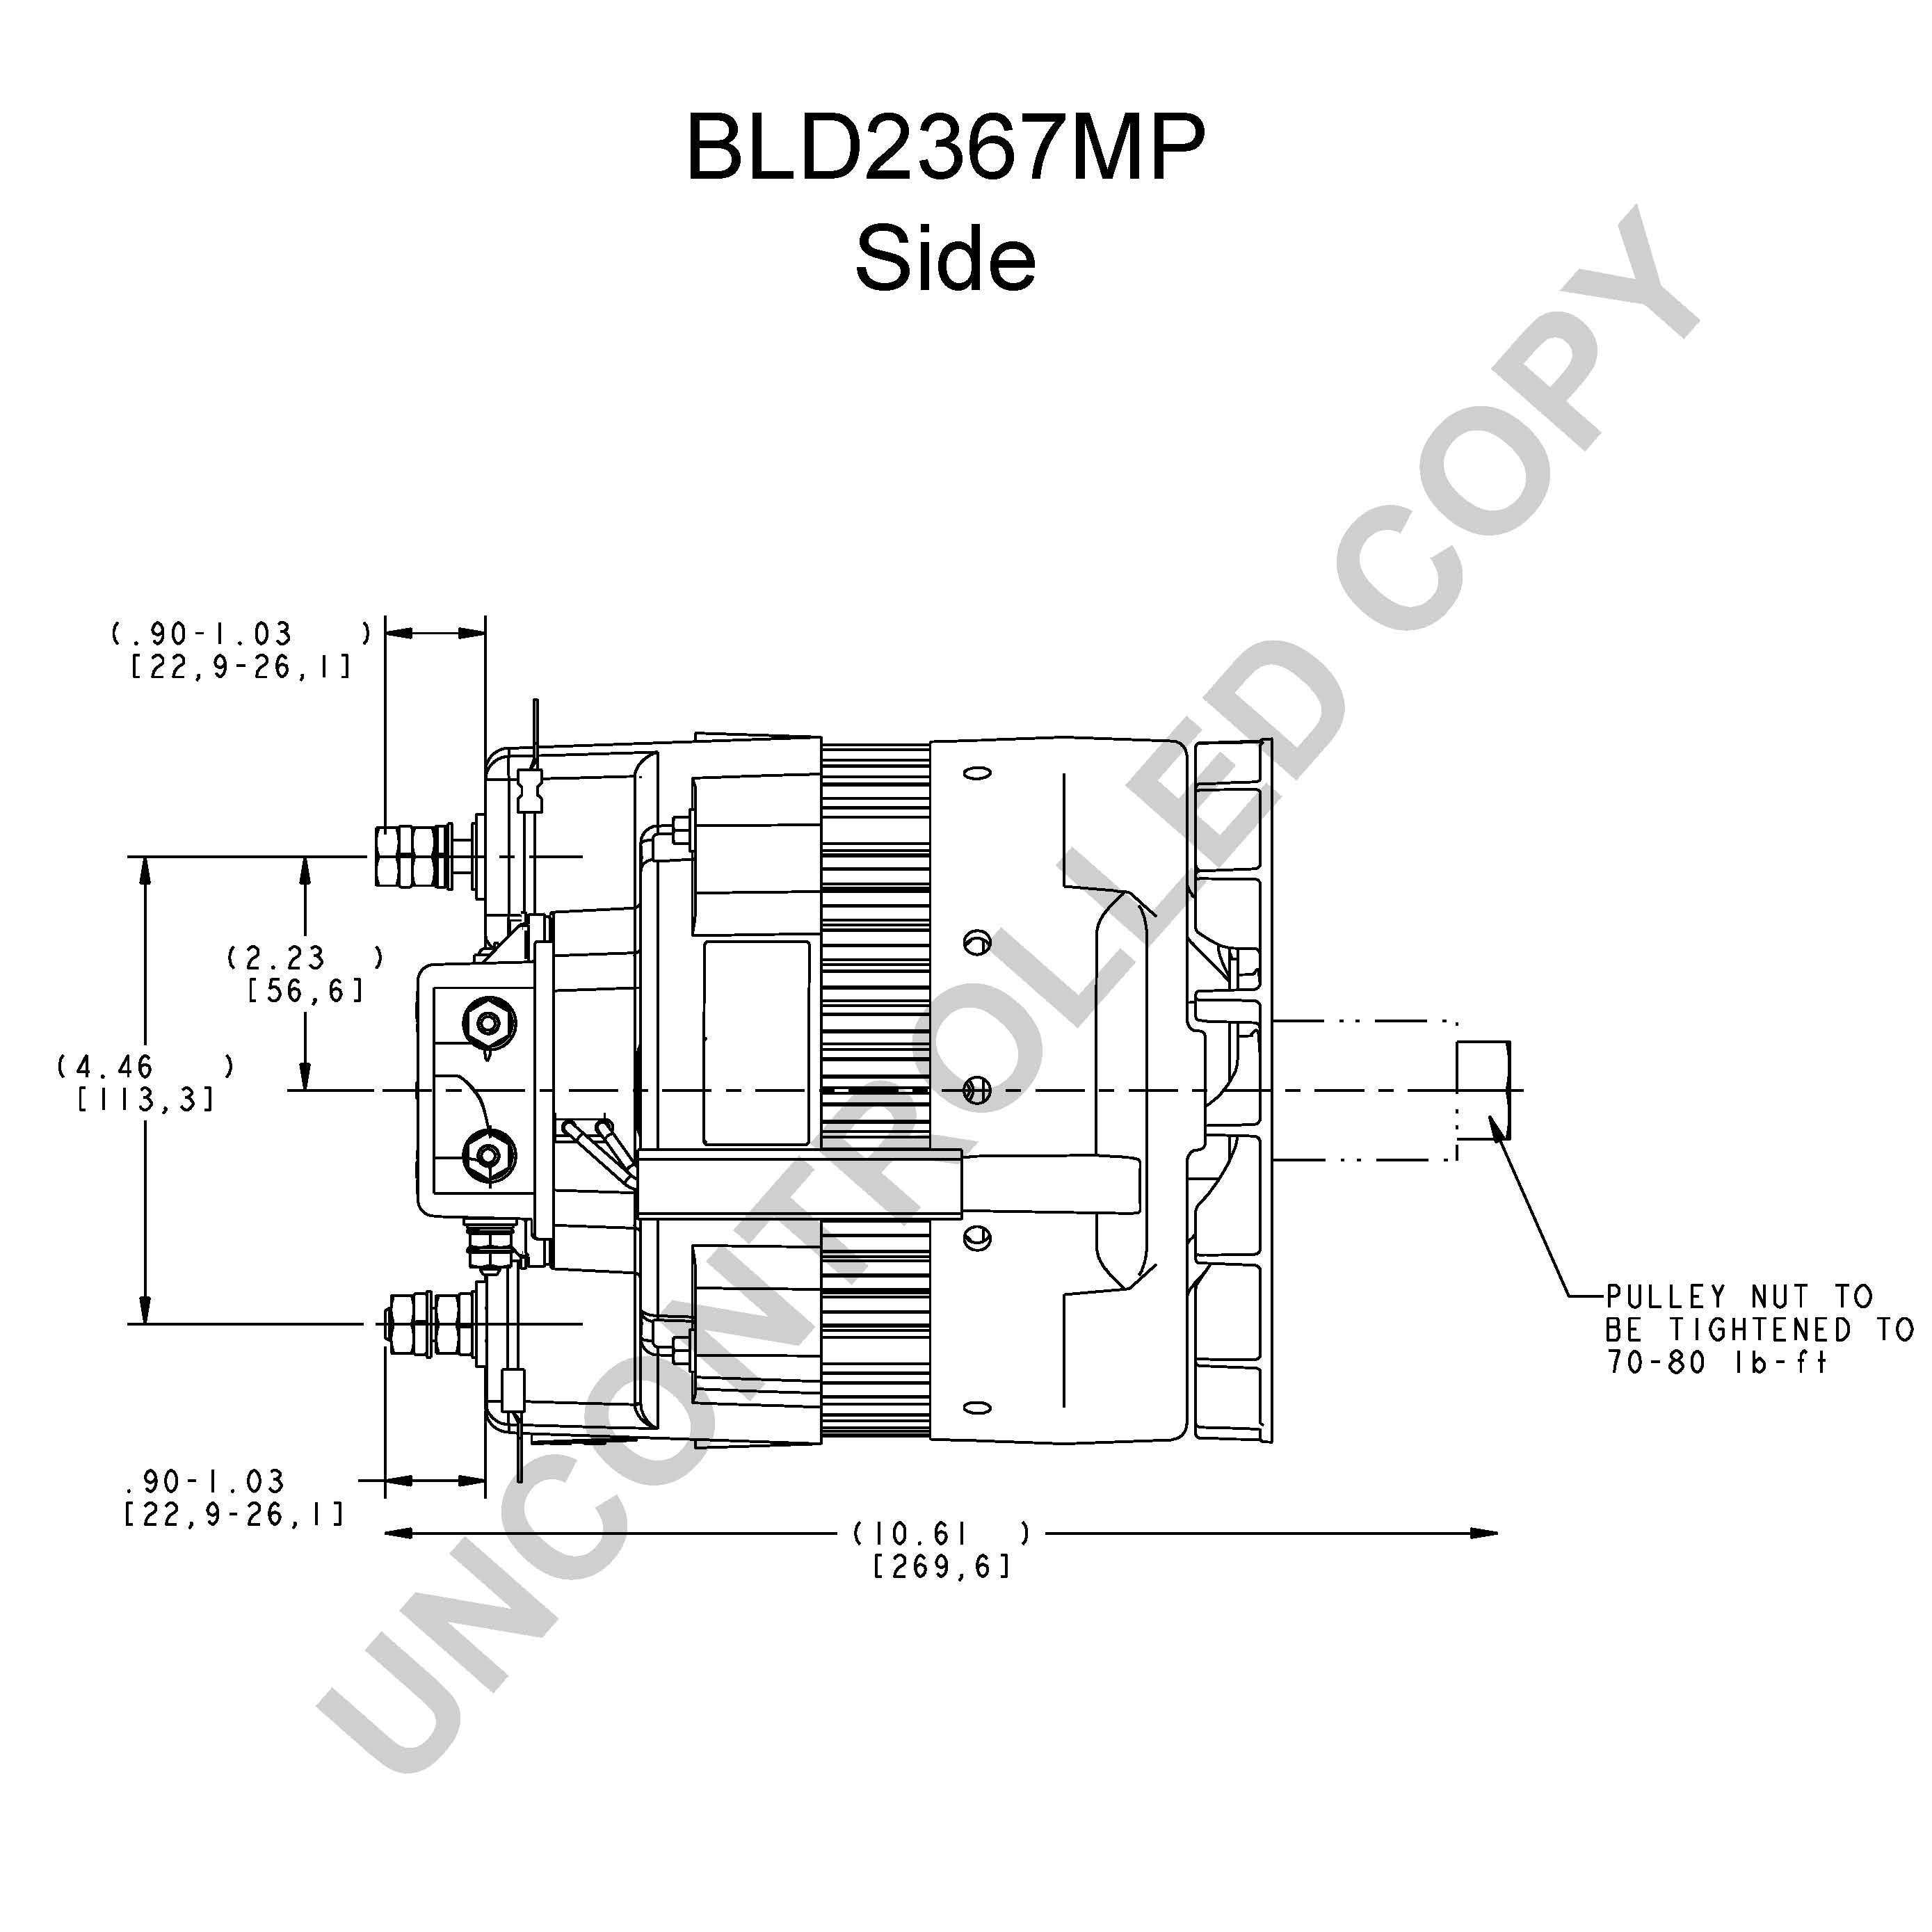 BLD2367MP Side Dim Drawing Output Curve BLD2367MP Output Curve Wiring Diagram